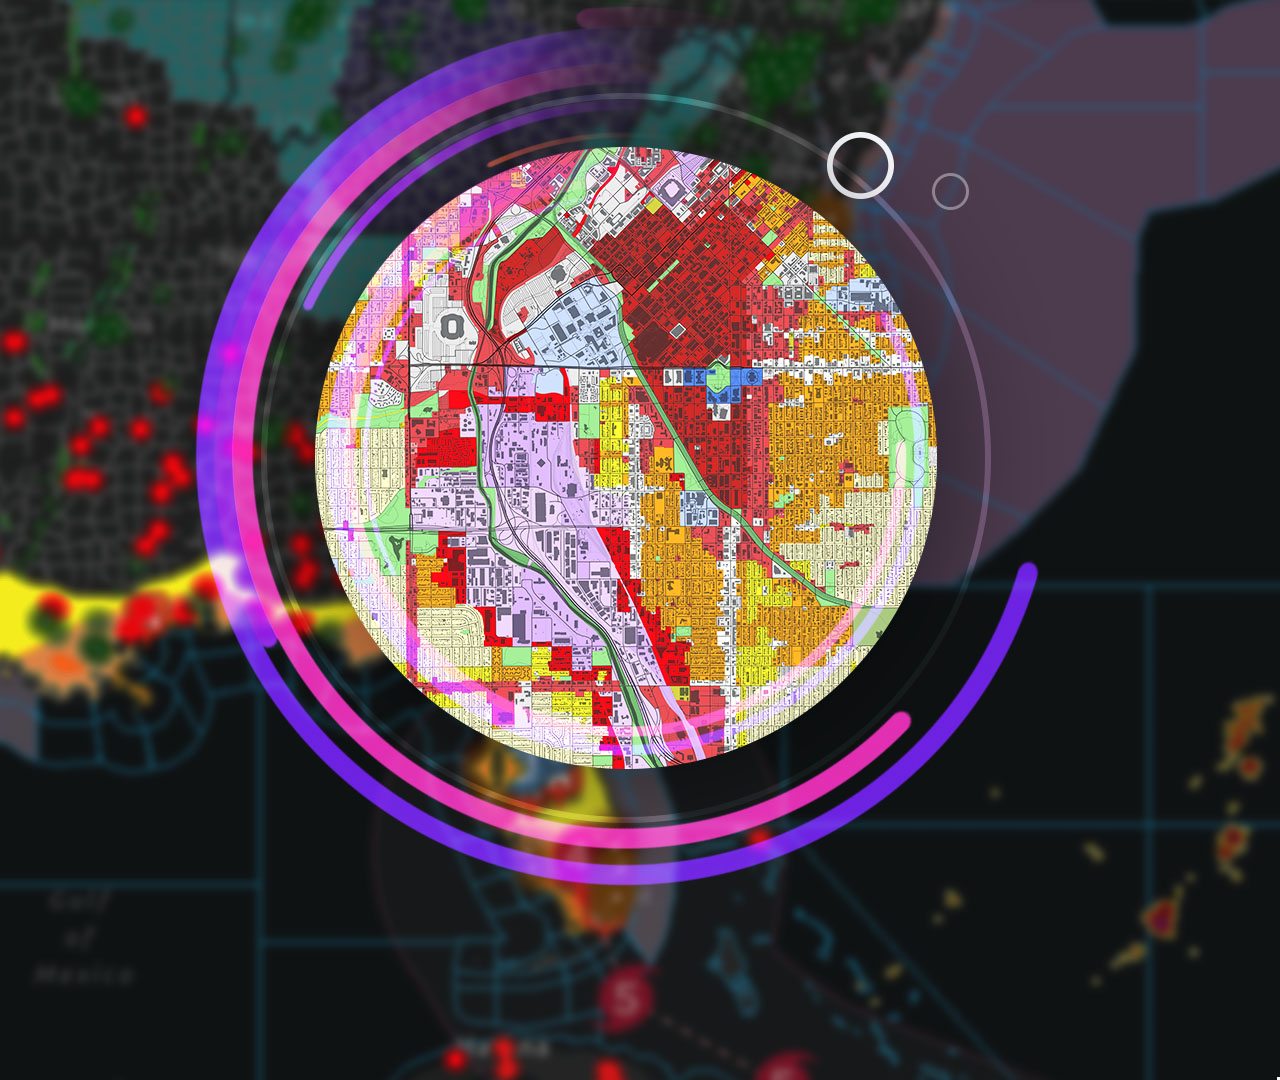 Image of a computer displaying a spatial data map, surrounded by images of tall city buildings